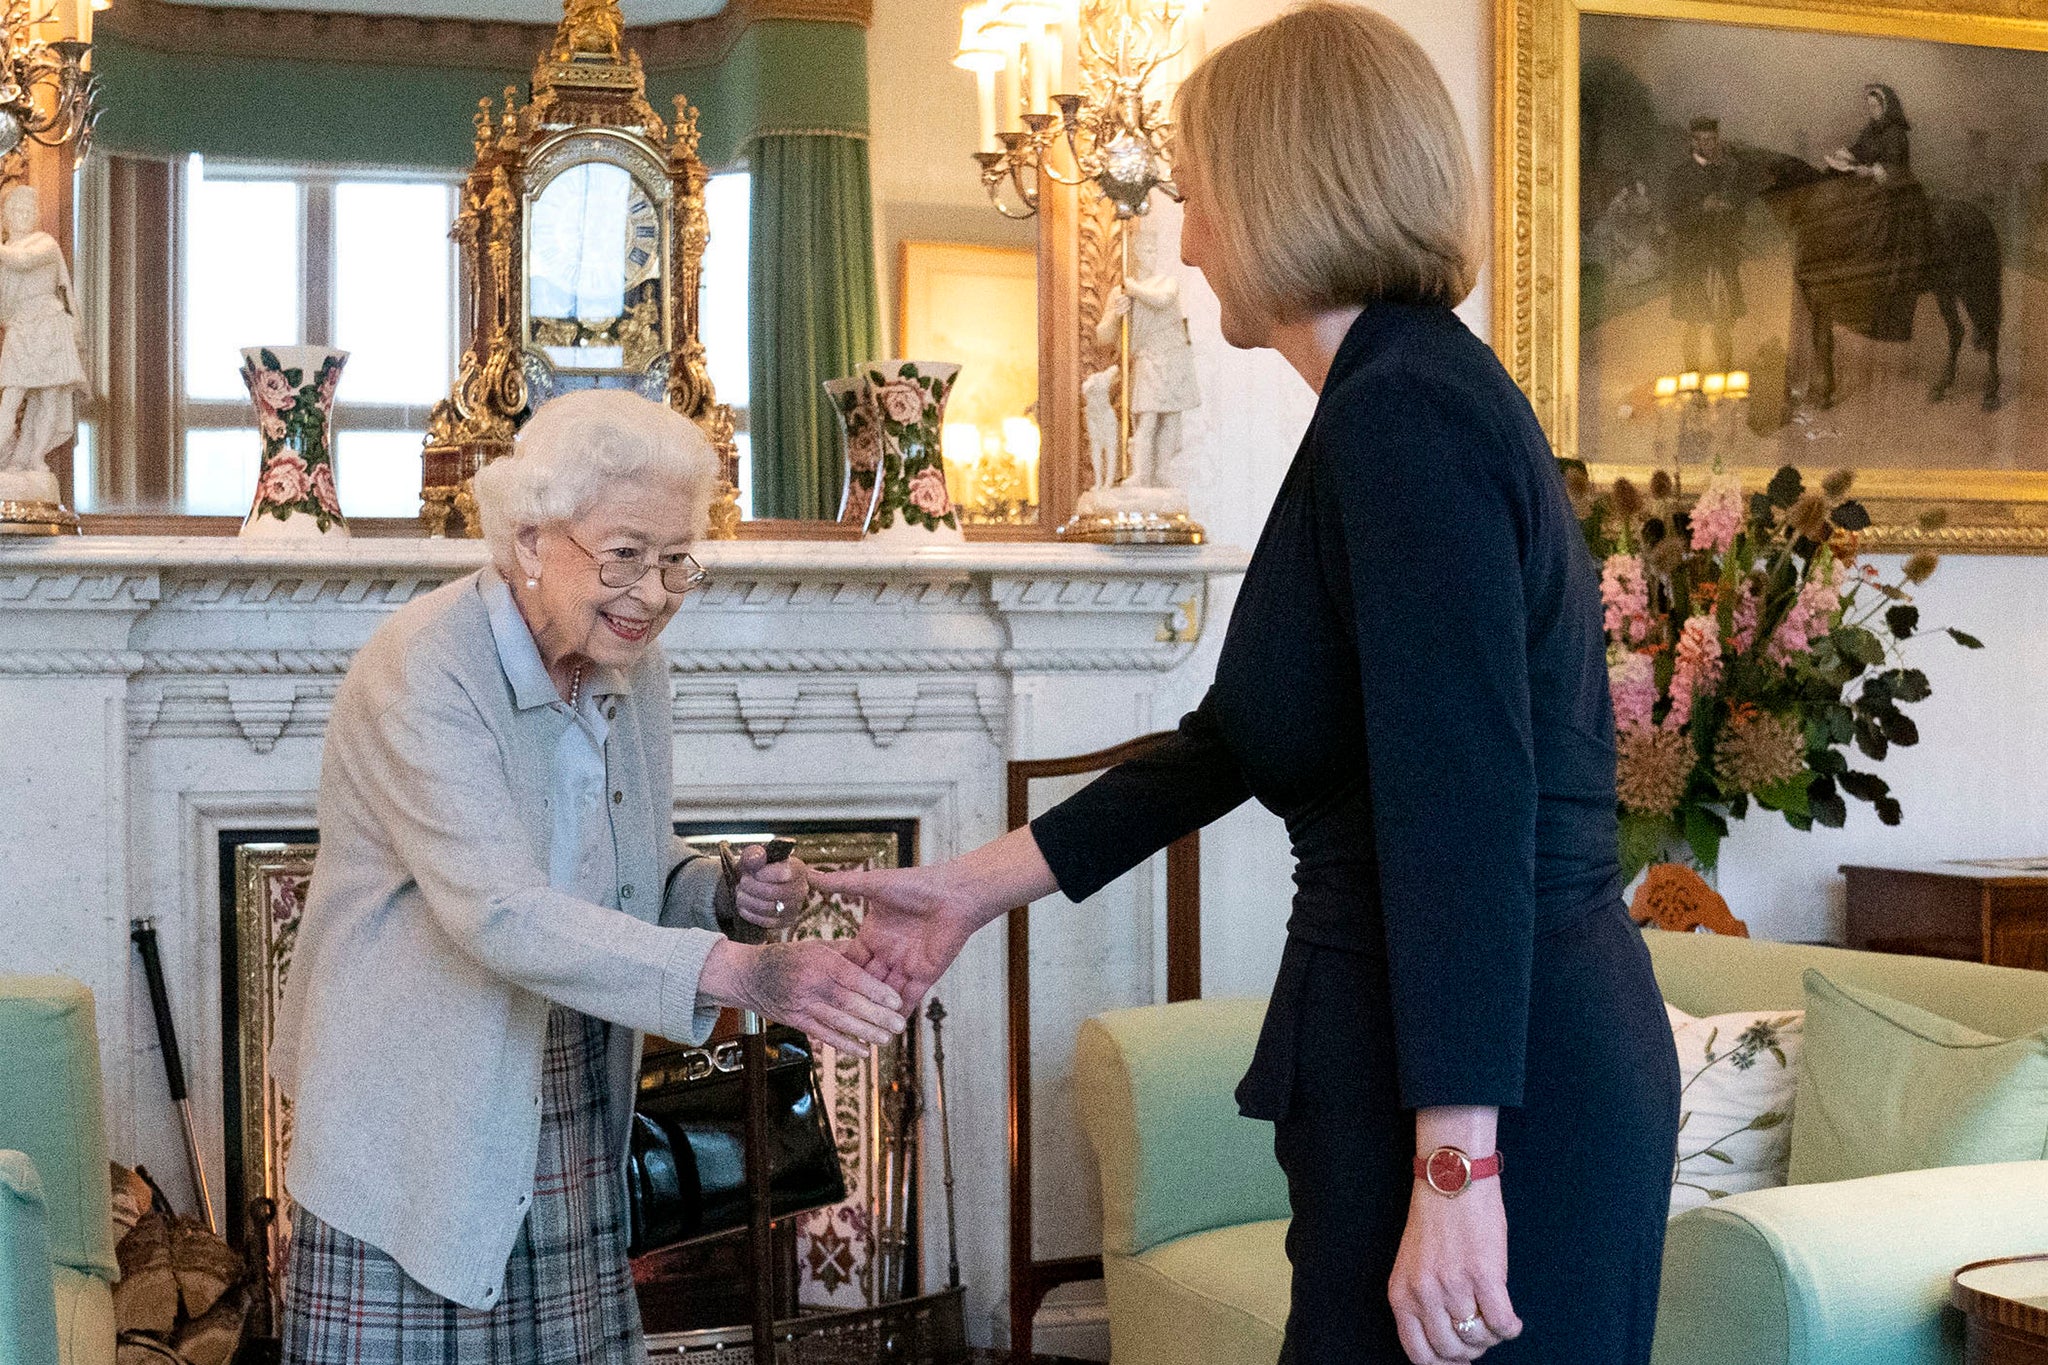 The final prime minister the late Queen invited to form a government was infamously Liz Truss whom she met at Balmoral just two days before her death